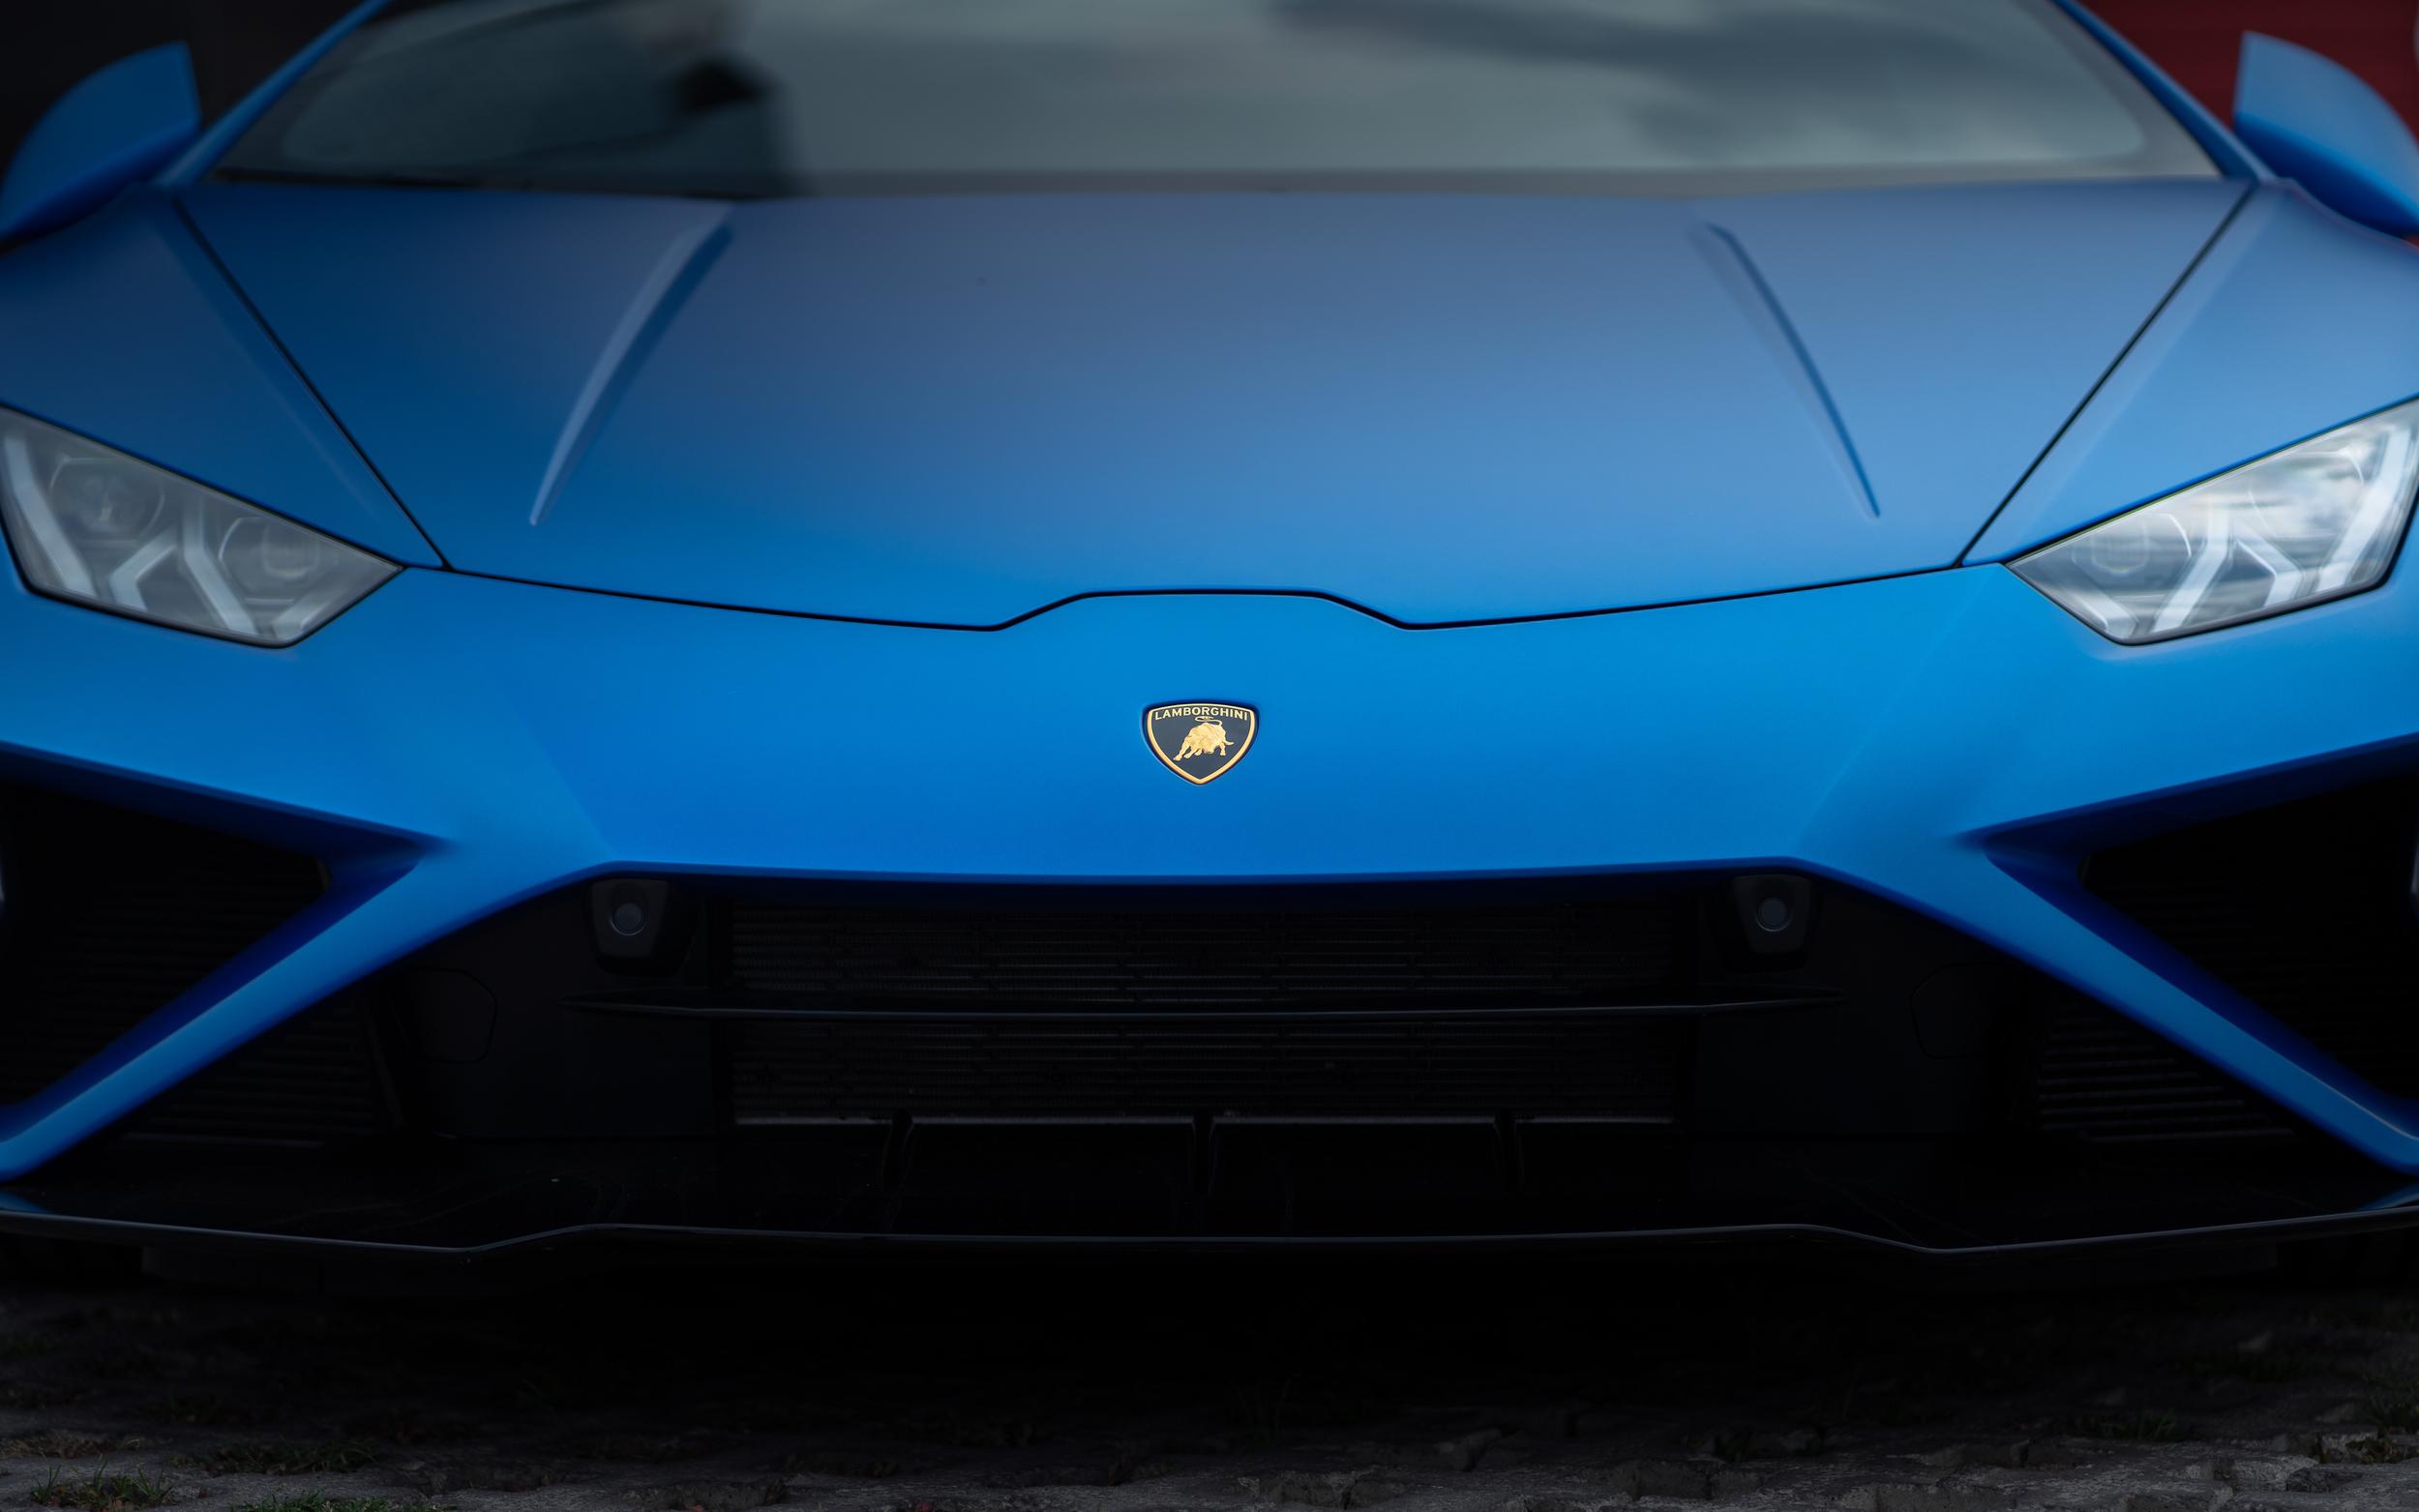 How much does it cost to lease a lamborghini?